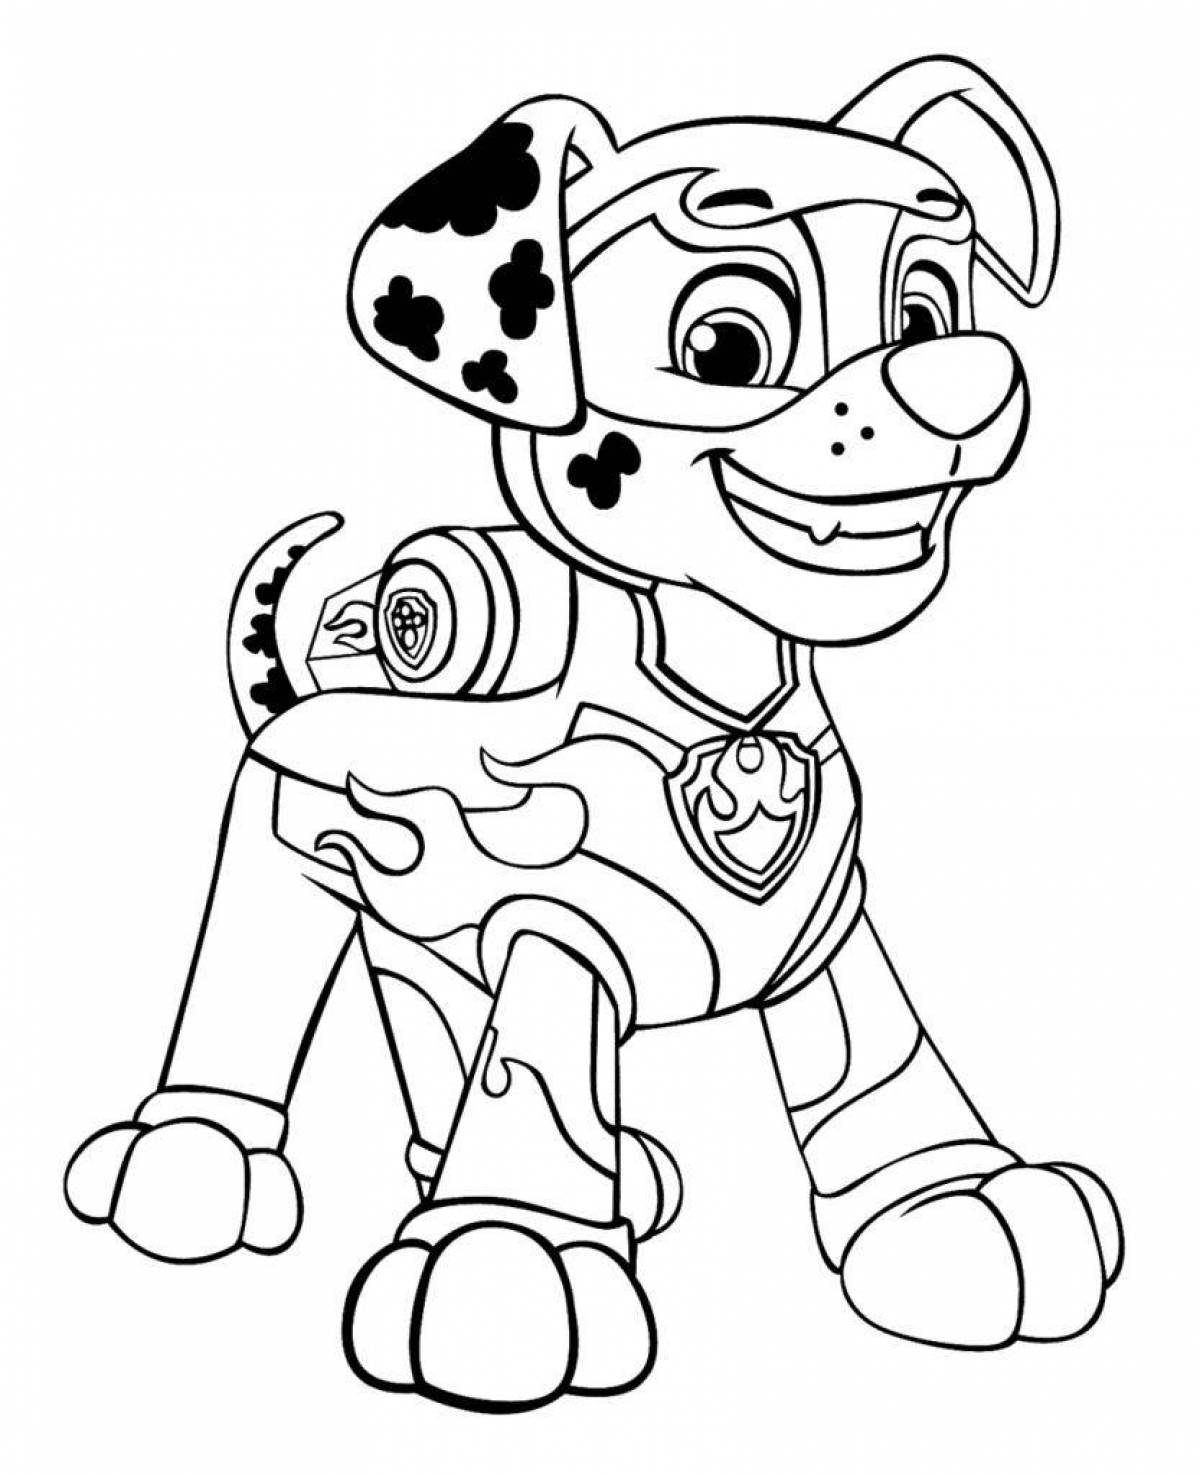 Adorable Paw Patrol coloring page